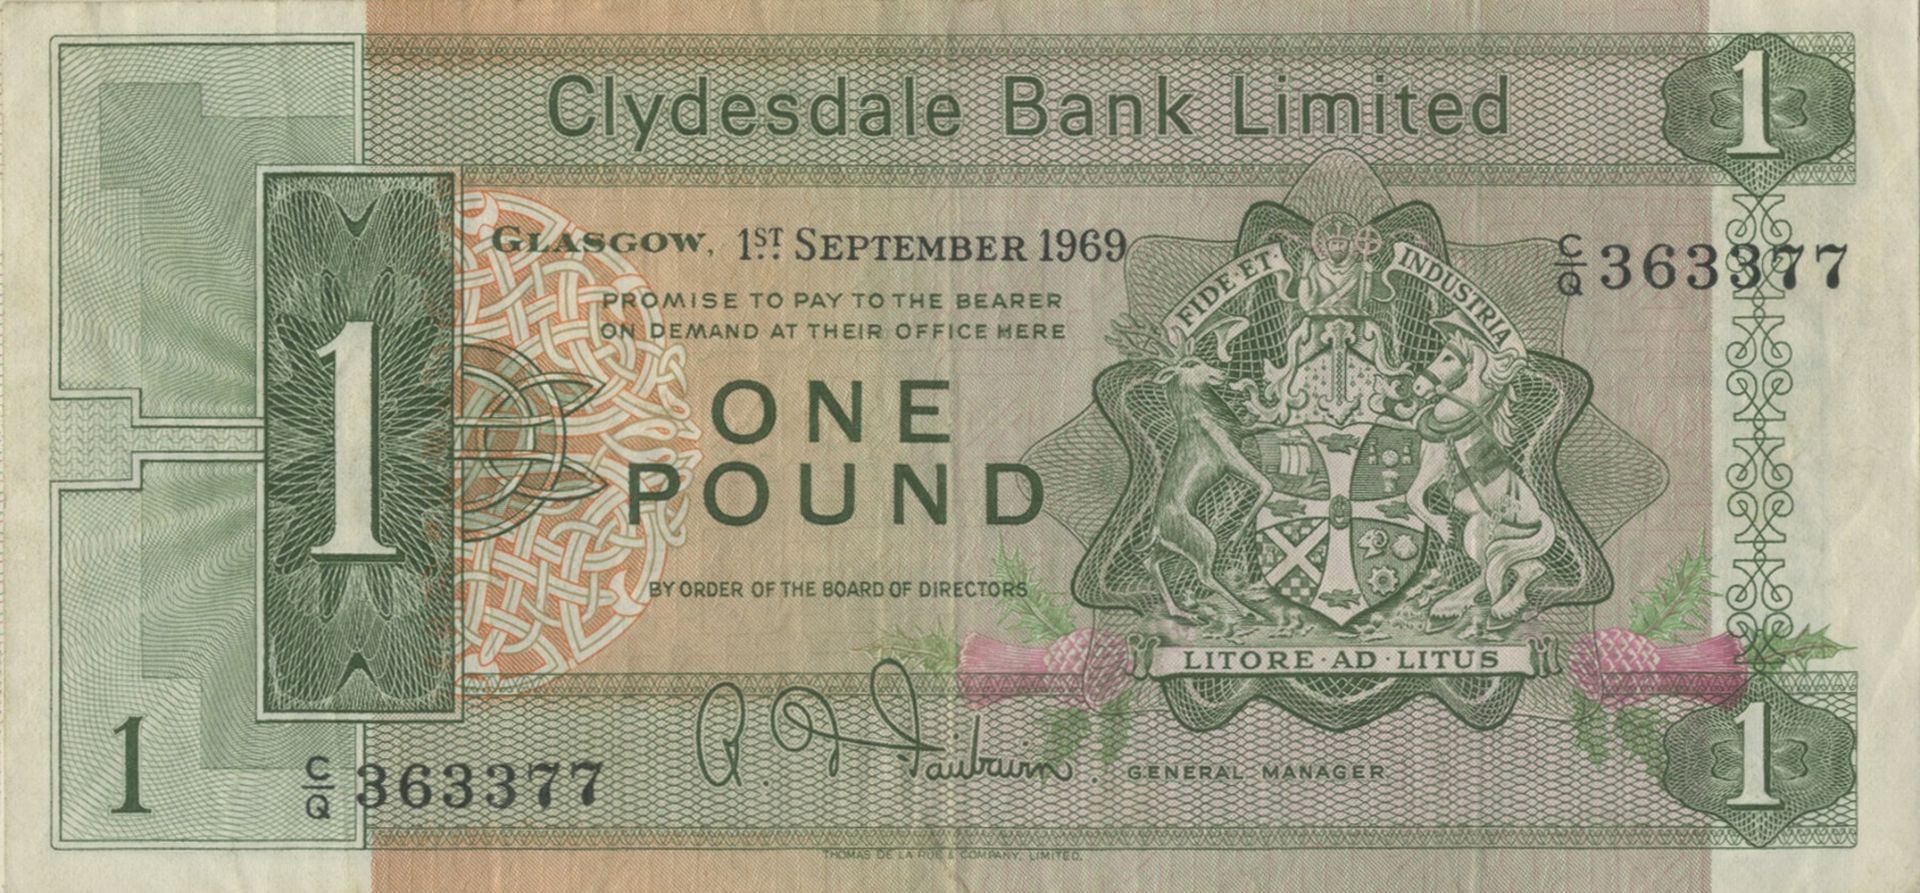 Clydesdale Bank Ltd,